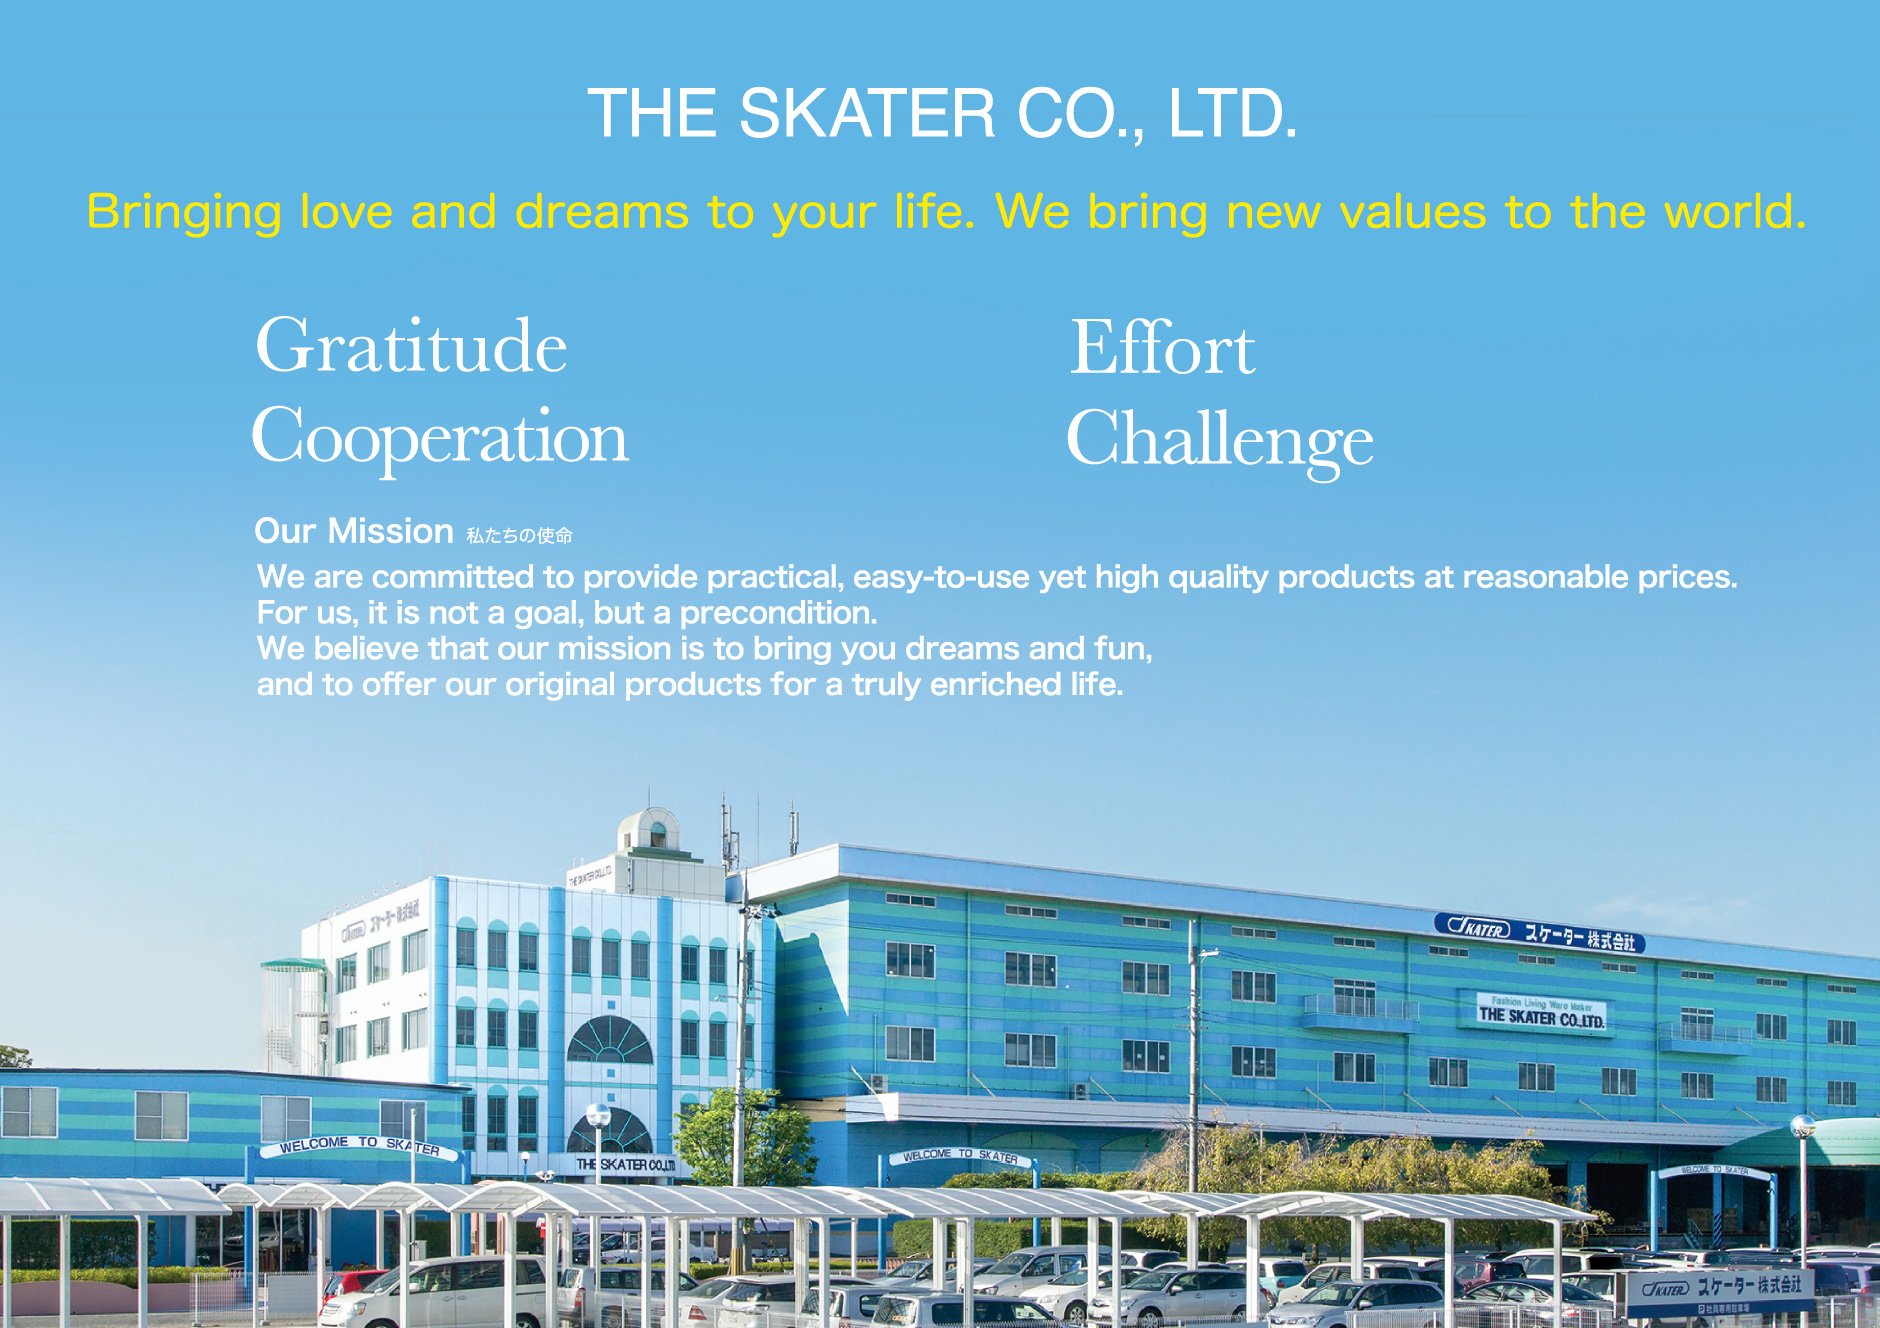 THE SKATER CO., LTD. Bringing love and dreams to your life. We bring new values to the world. Gratitude Effort Cooperation Challenge Our Mission We are committed to provide practical, easy-to-use yet high quality products at reasonable prices. For us, it is not a goal, but a precondition. We believe that our mission is to bring you dreams and fun, and to offer our original products for a truly enriched life.